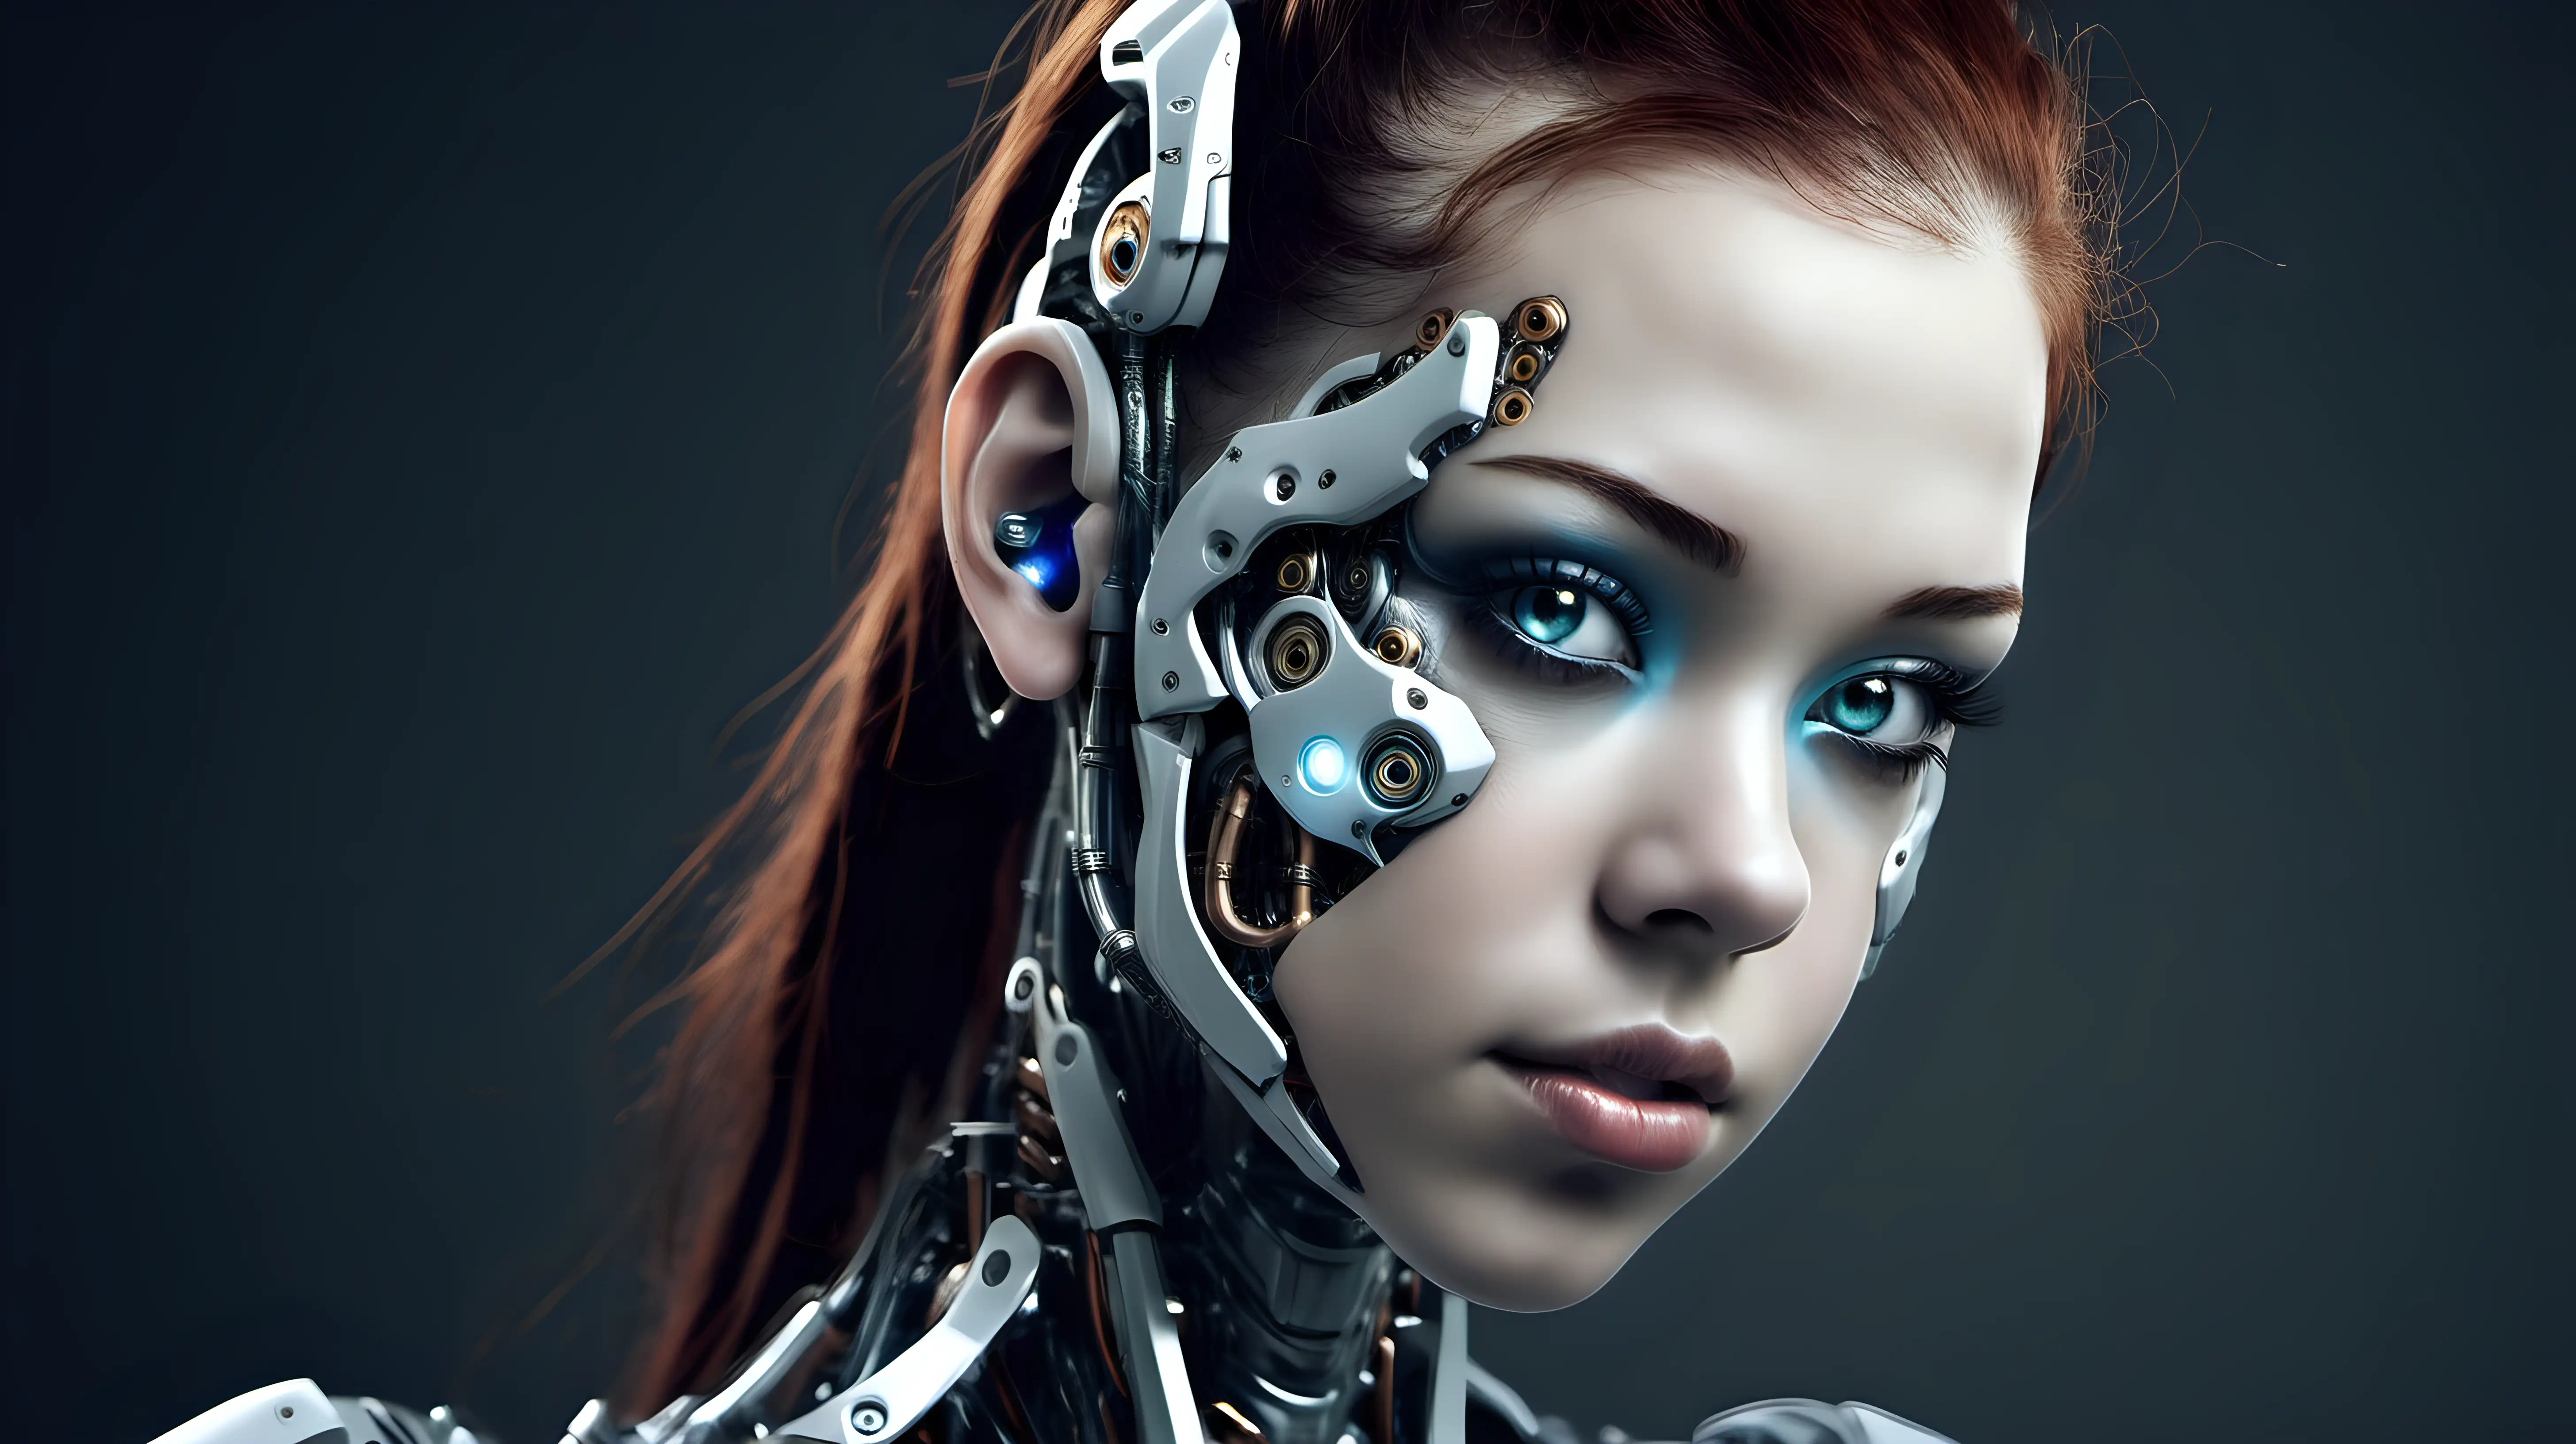 Cyborg woman, 18 years old. She has a cyborg face, but she is extremely beautiful.  